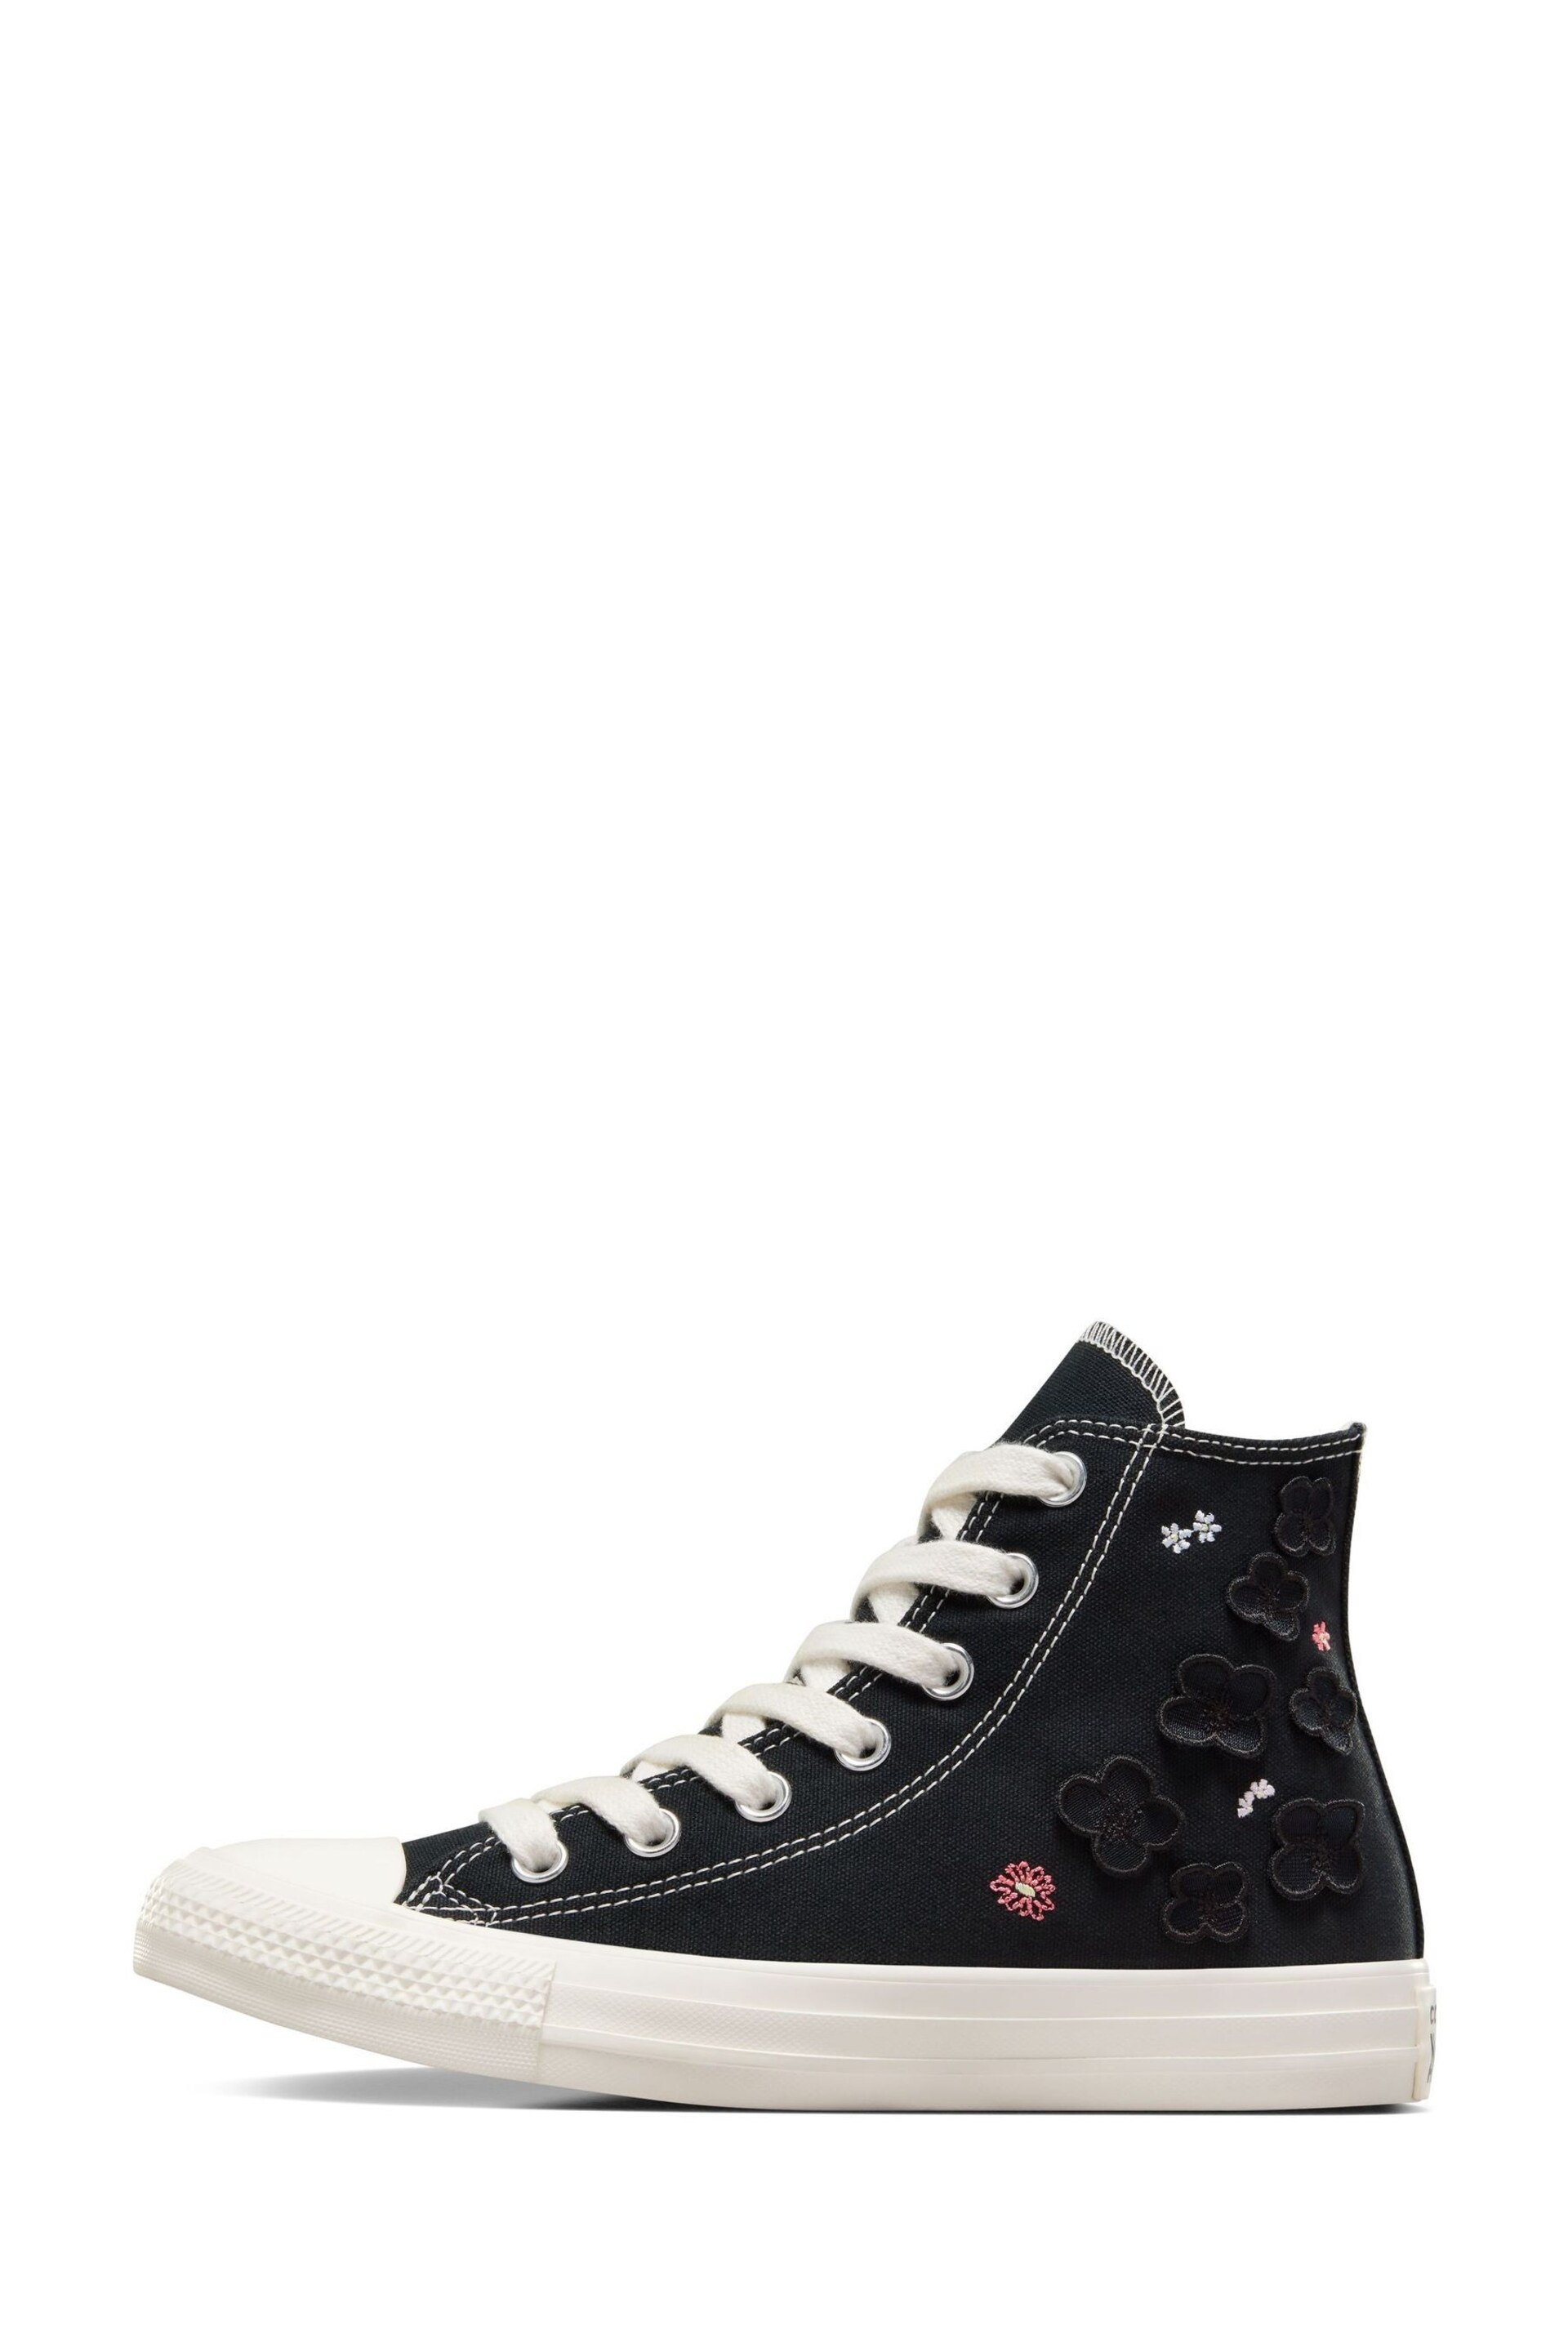 Converse Black Floral Embroidered High Top Trainers - Image 4 of 13